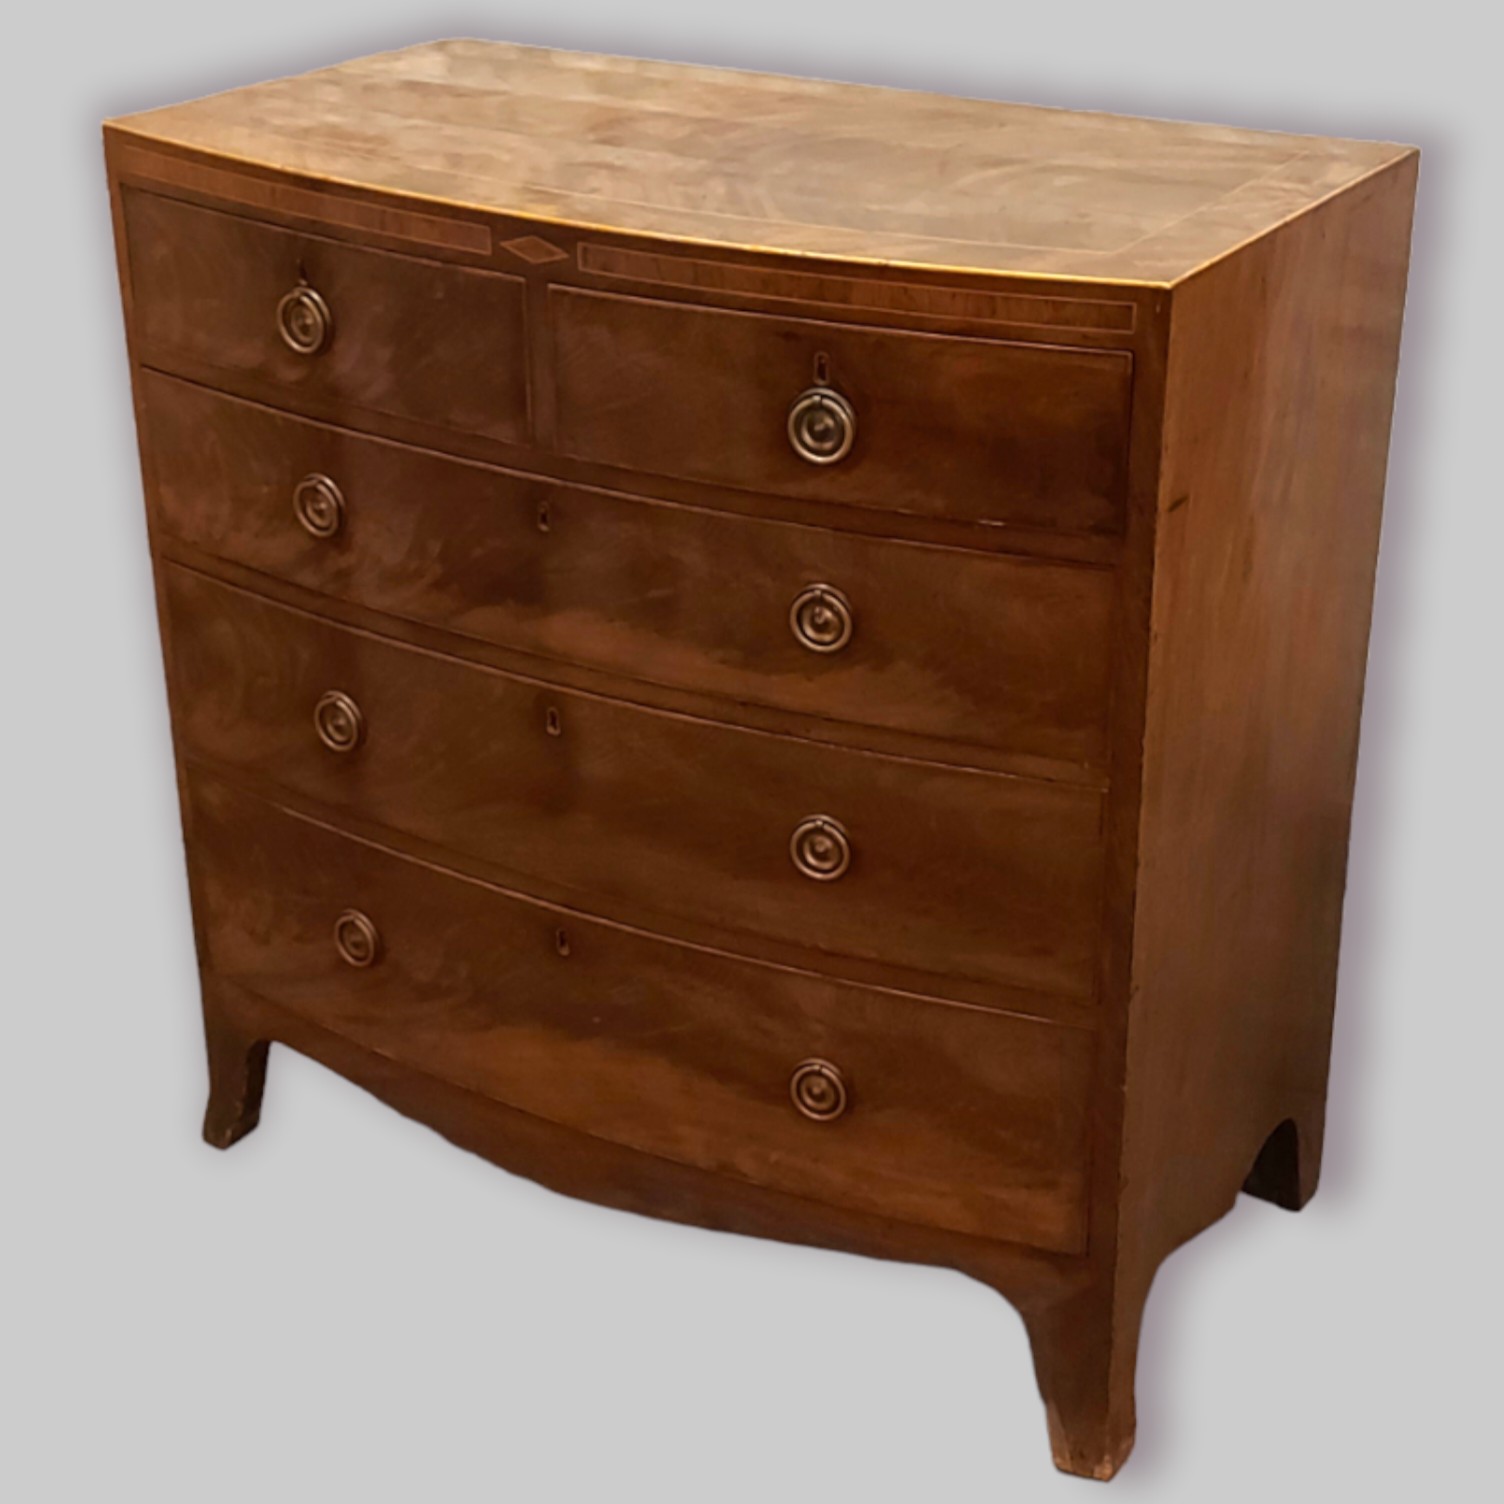 A 19th Century mahogany and inlaid bow fronted chest with two short and three long drawers with